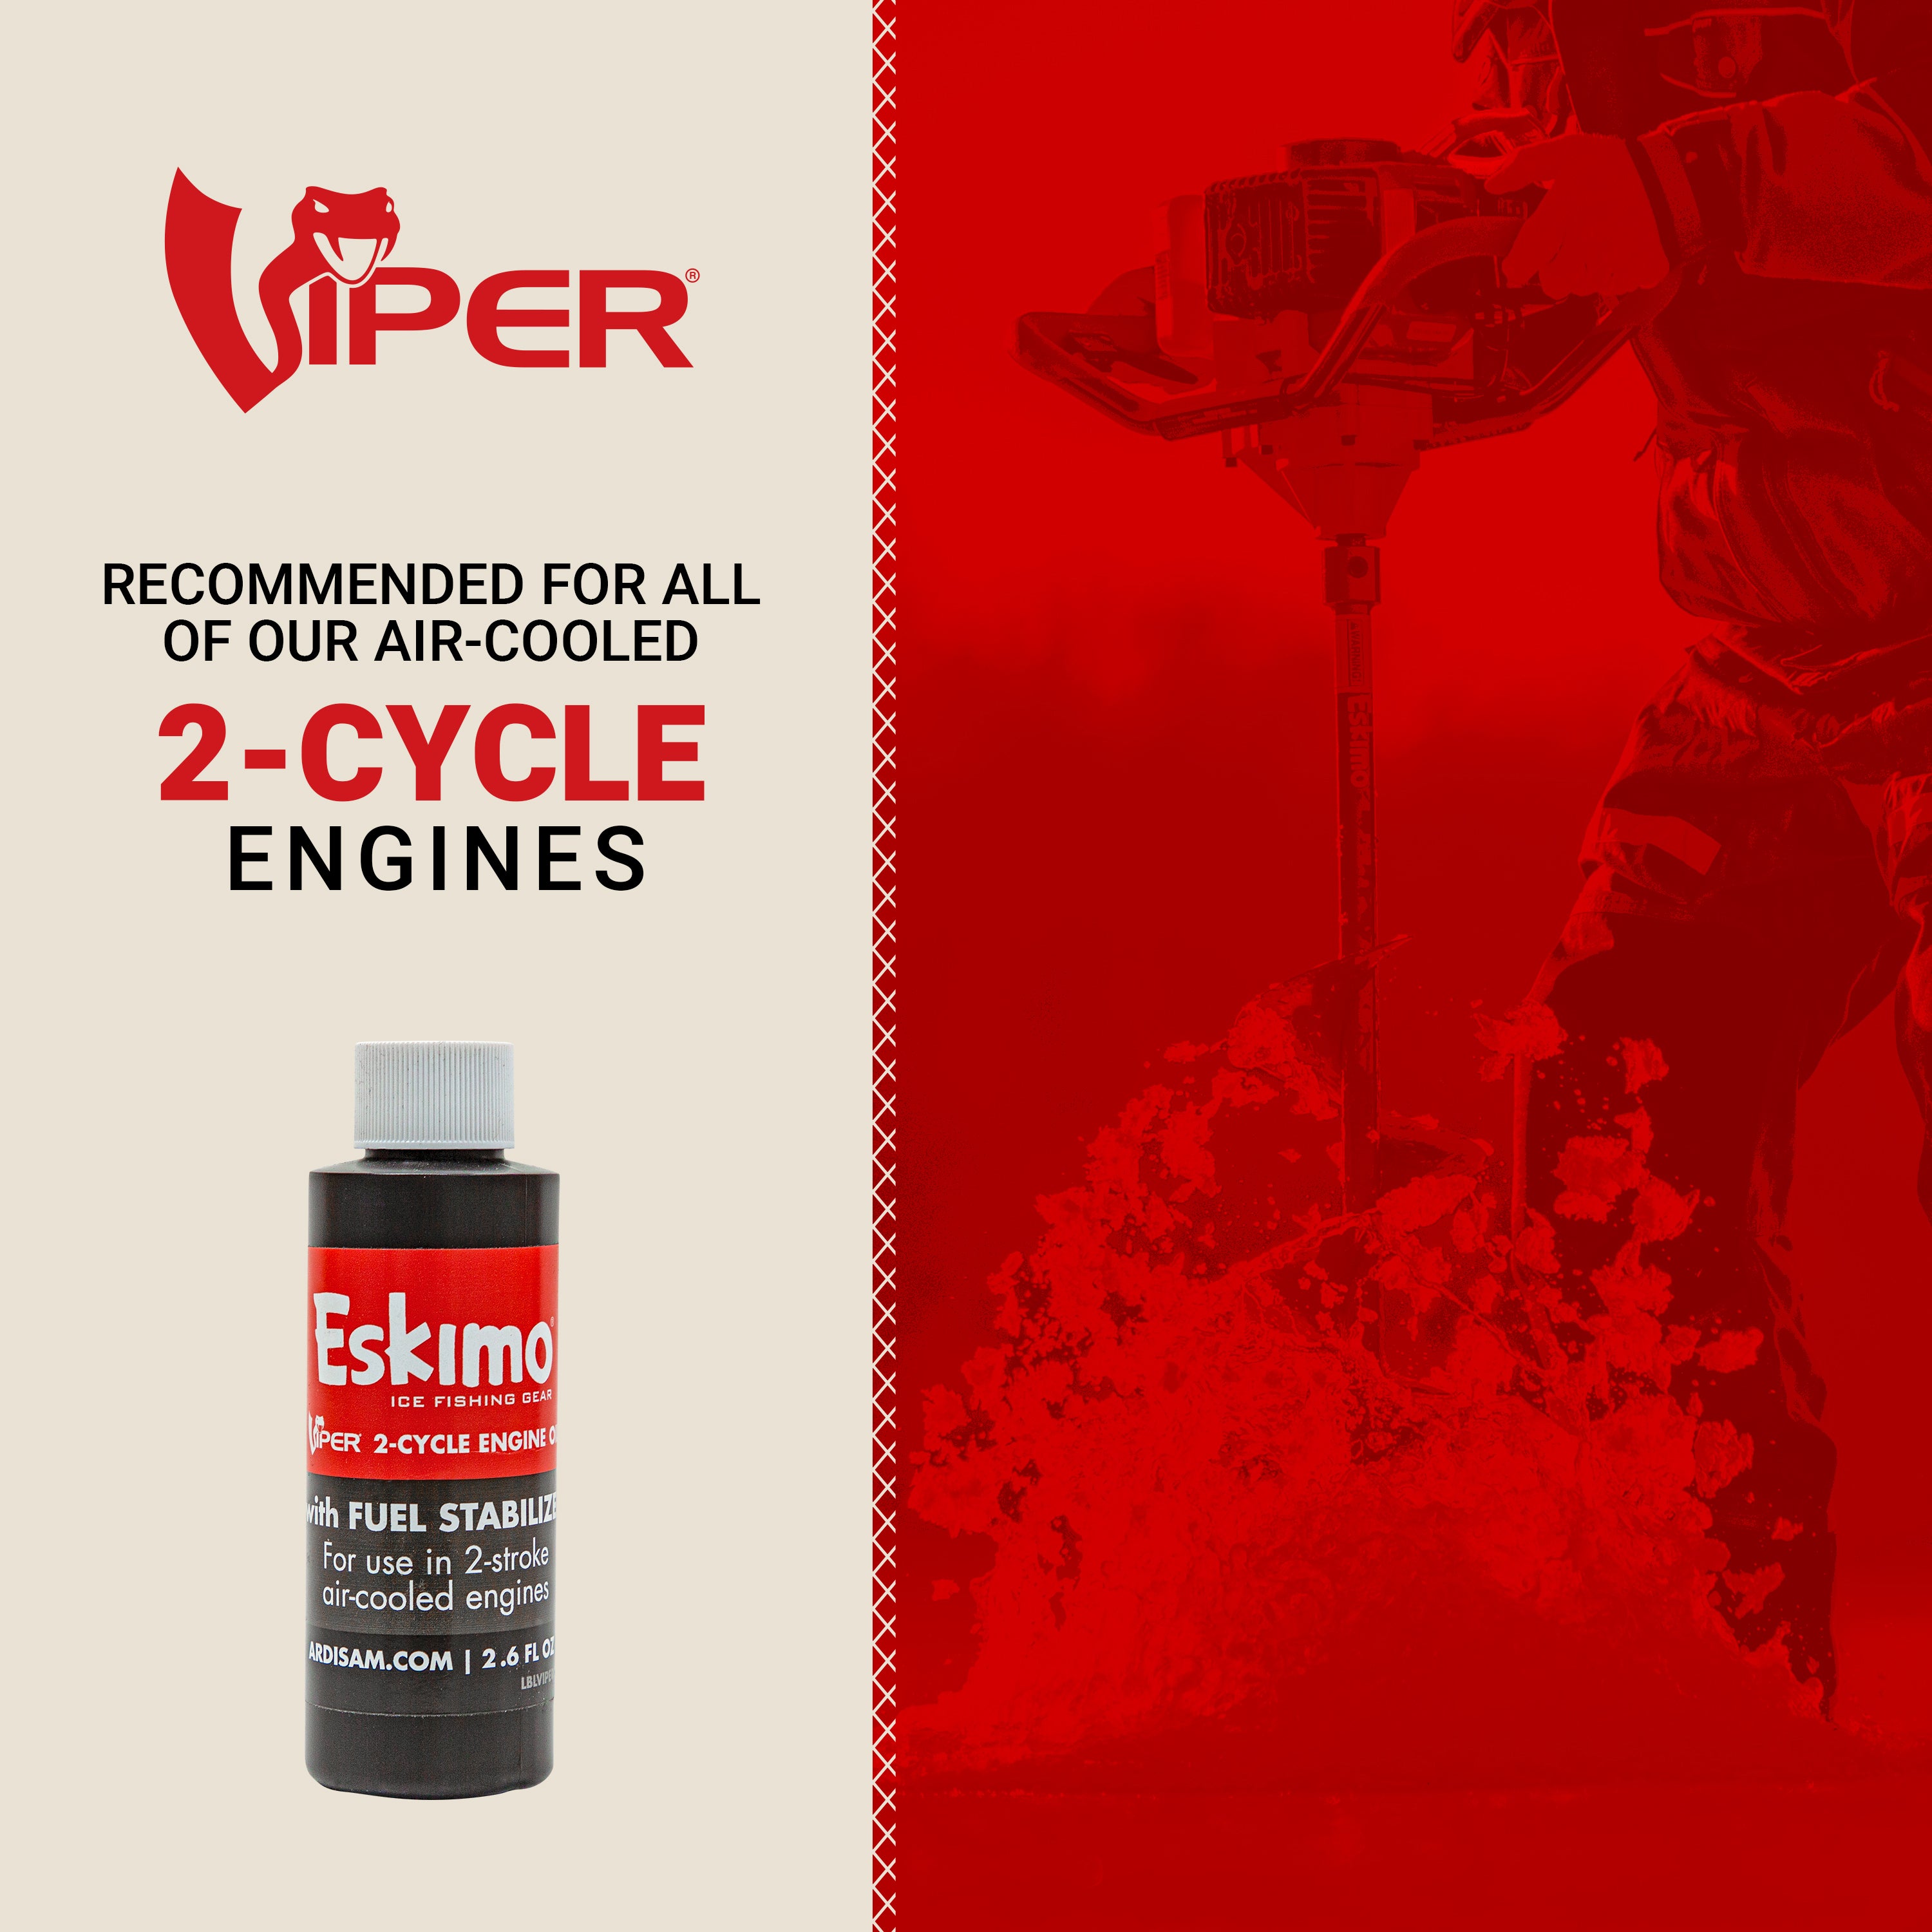 Viper® 2-Cycle Engine Oil